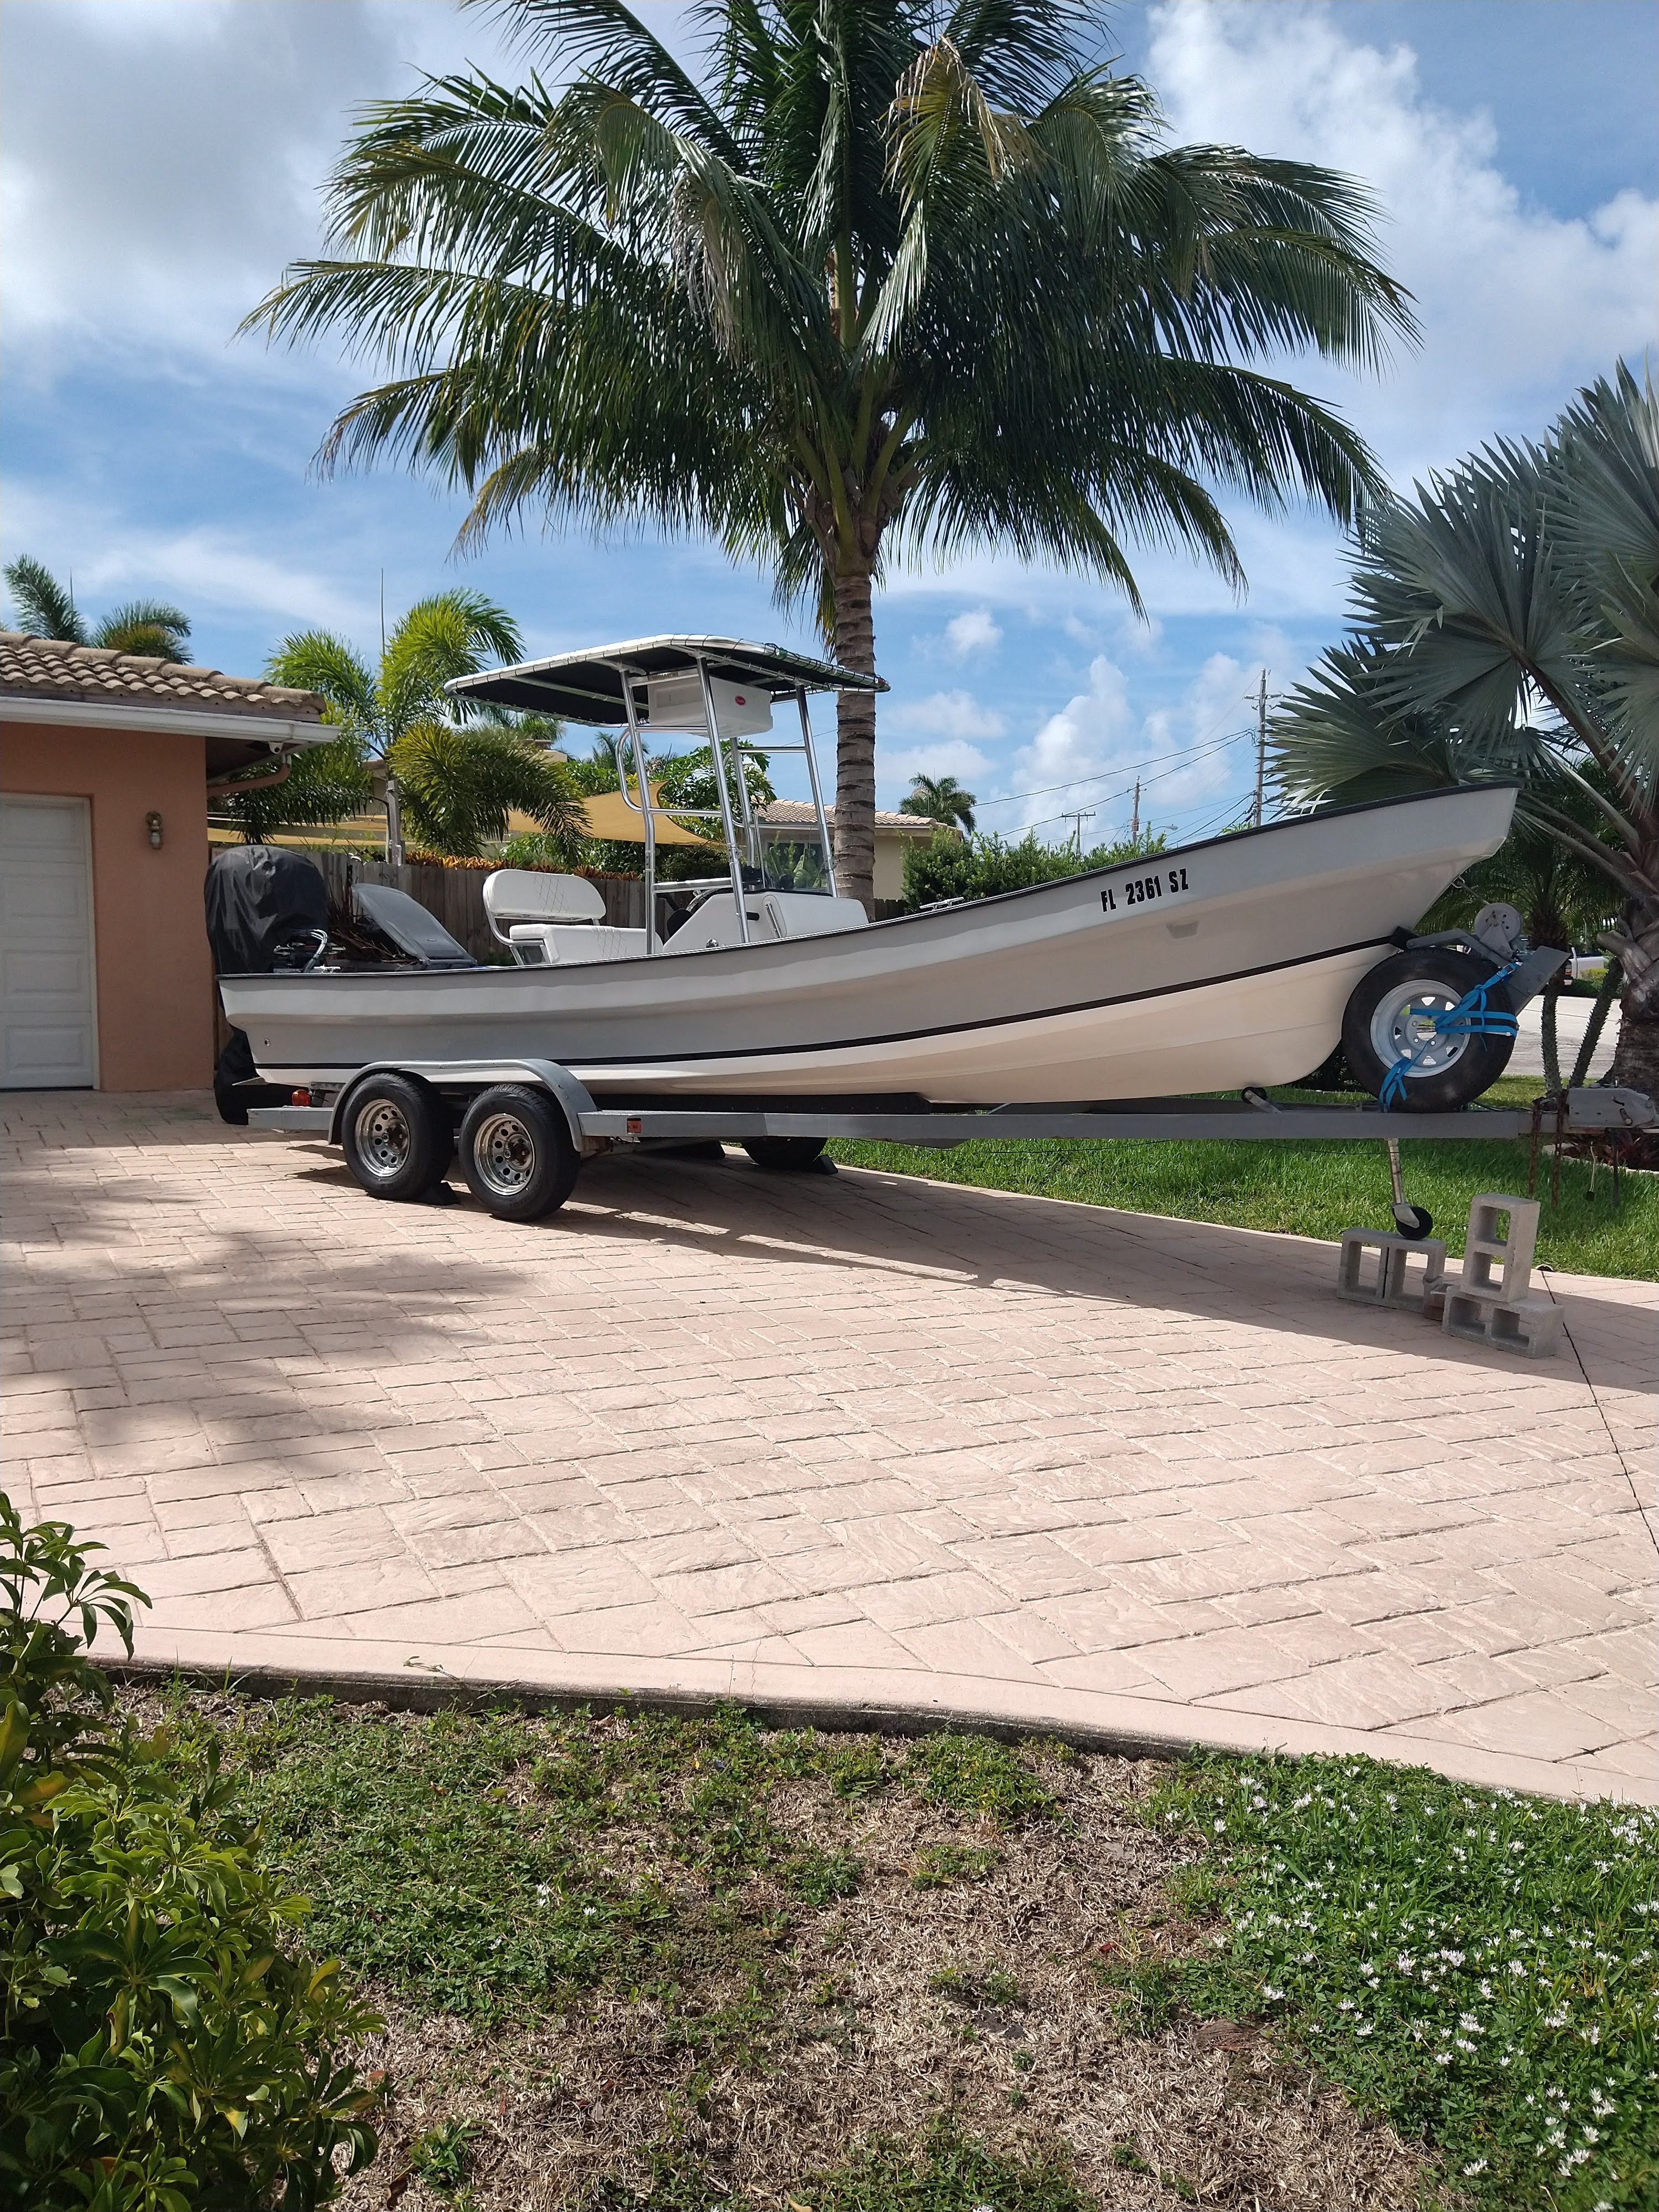 2021 23 foot none Panga Power boat for sale in Pompano Beach, FL - image 5 